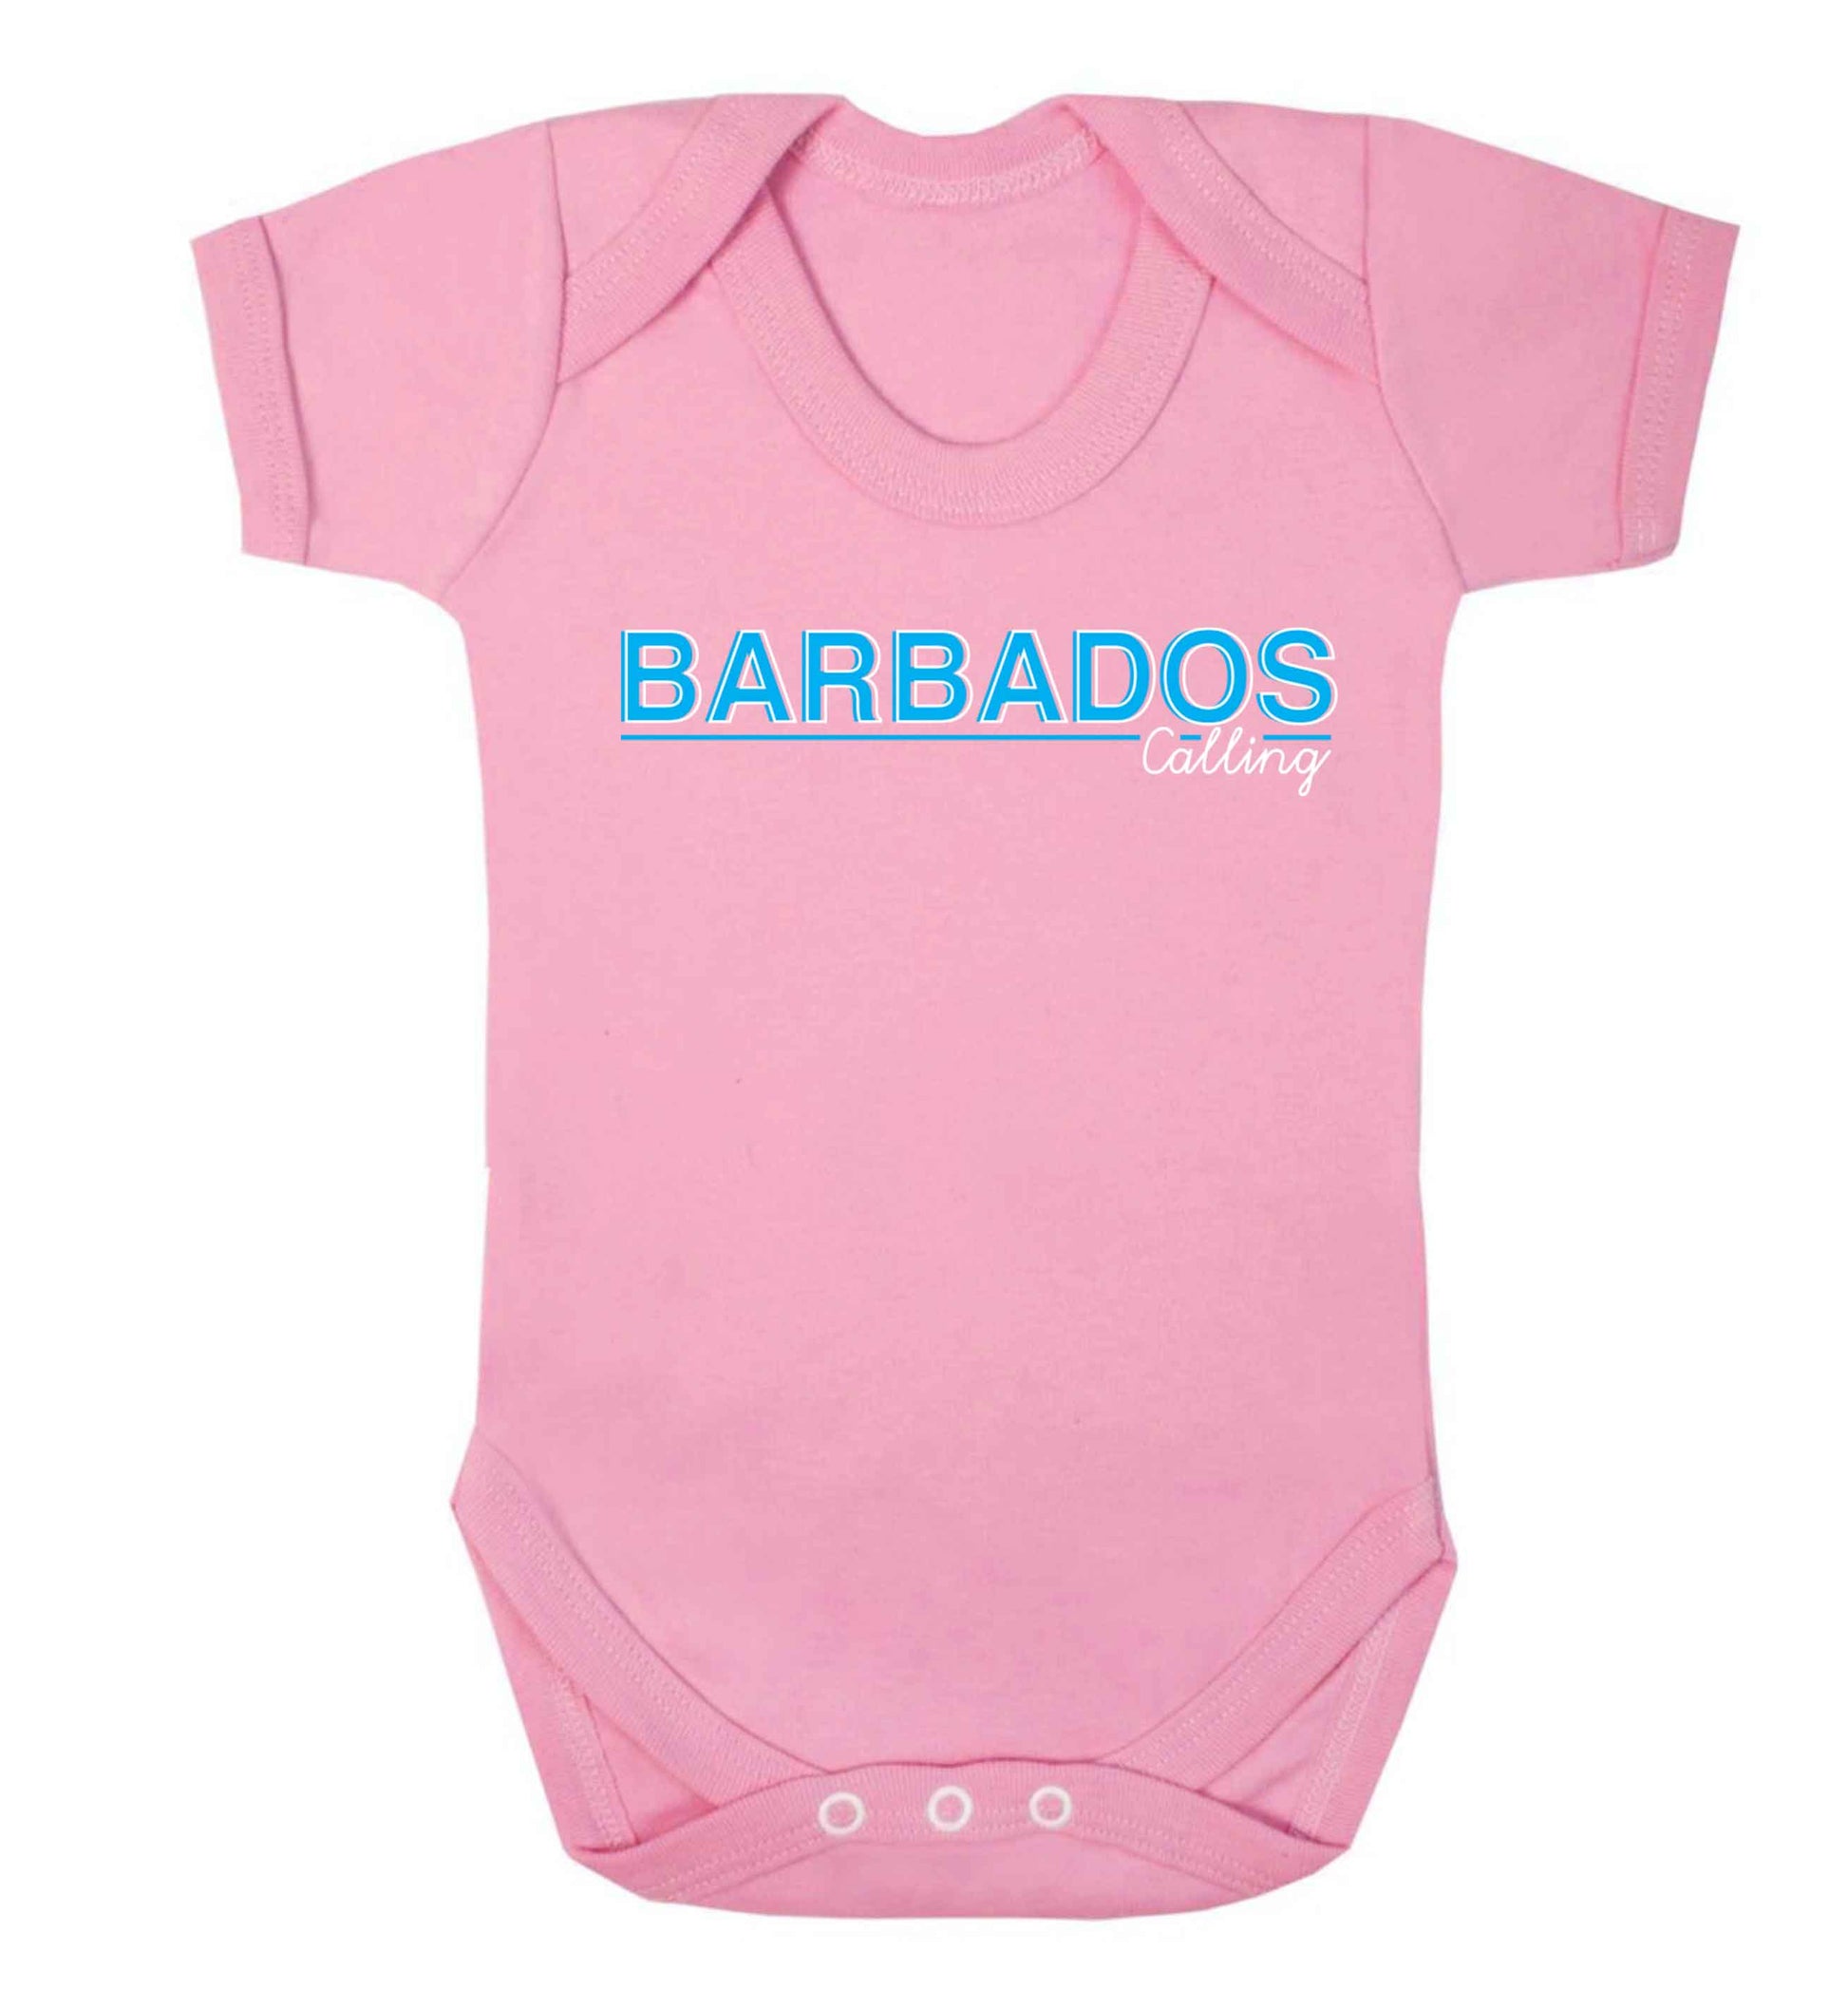 Barbados calling Baby Vest pale pink 18-24 months